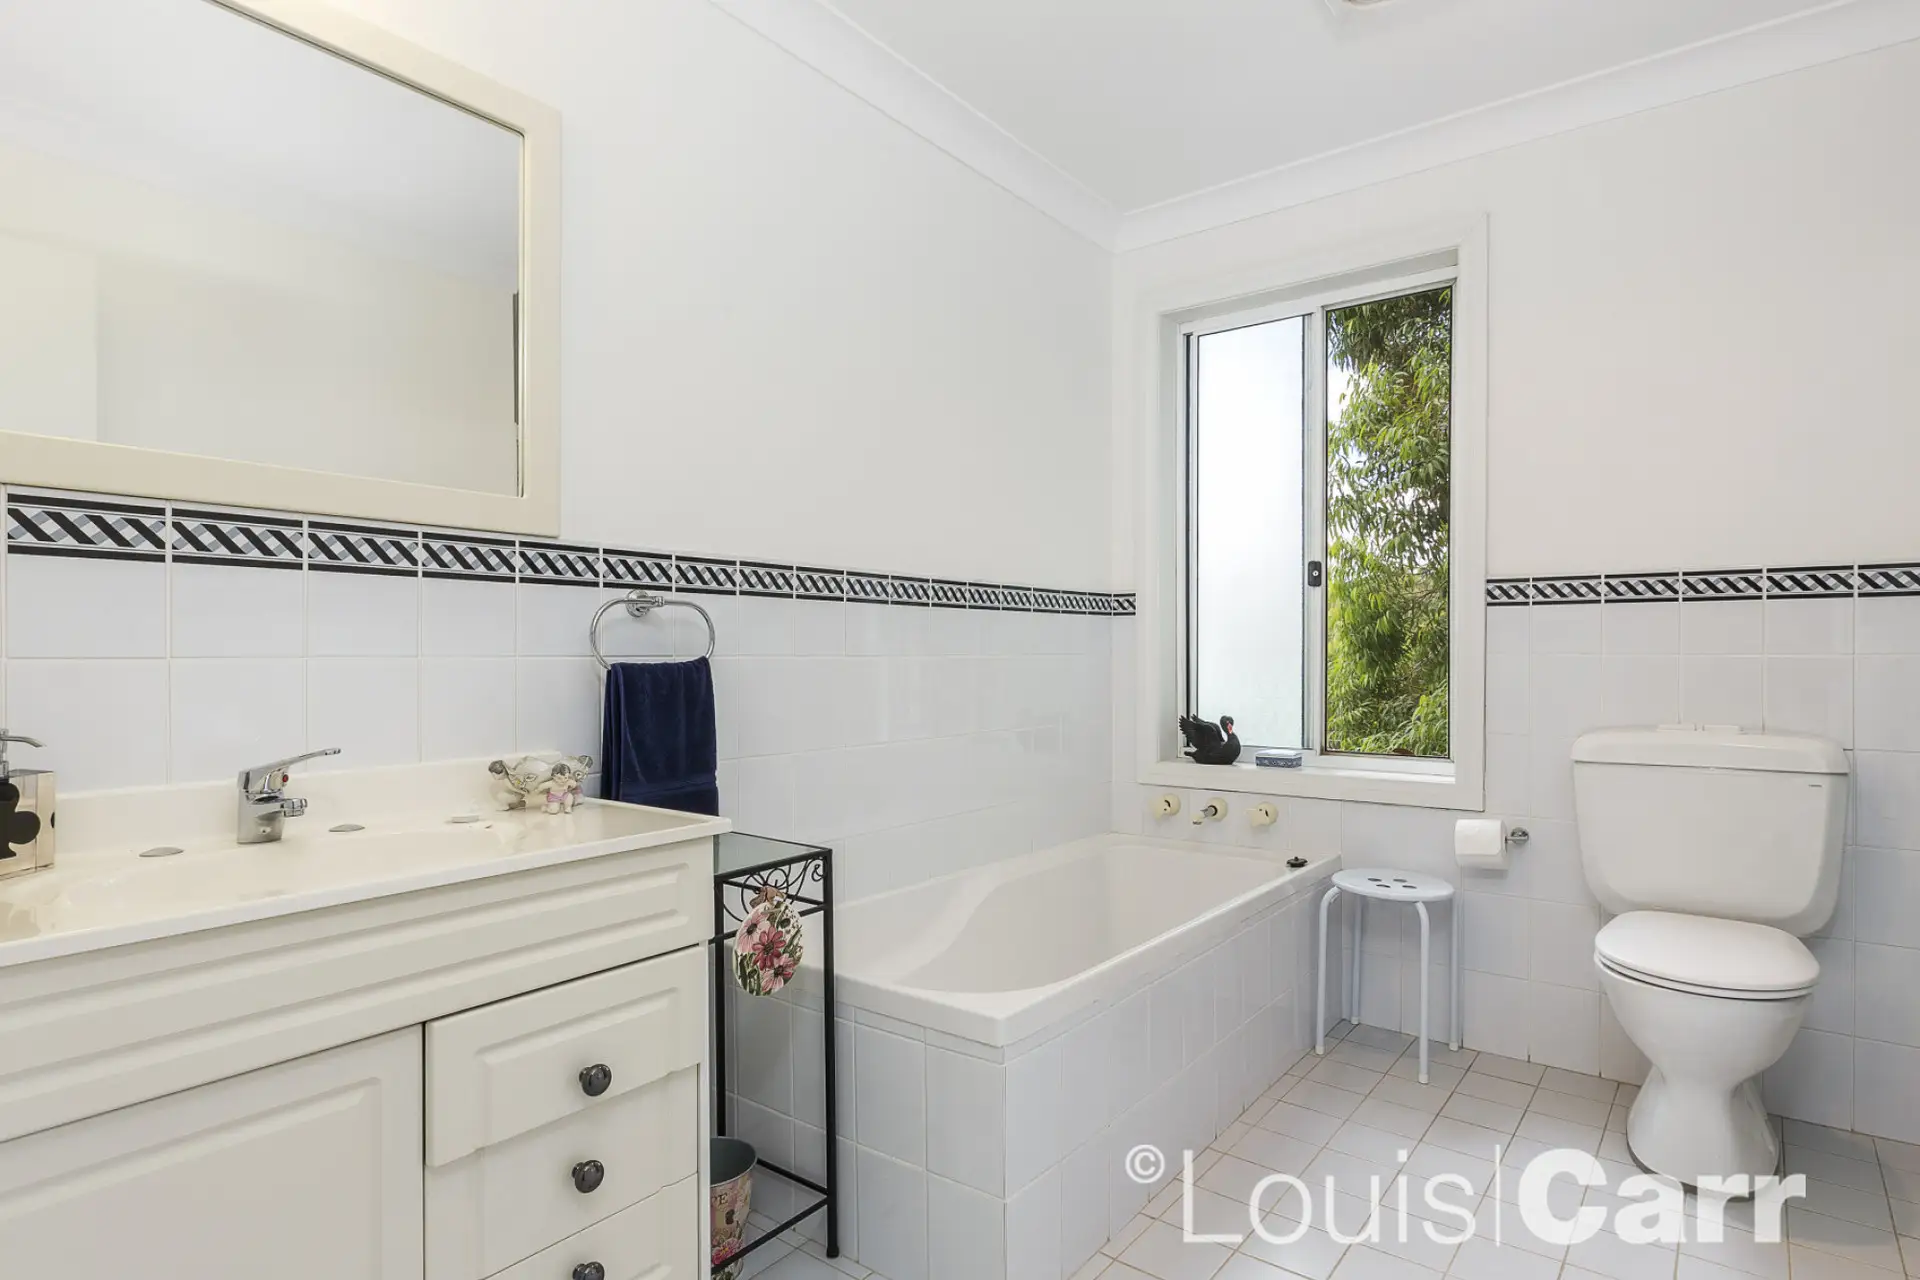 Photo #6: 22/1 Beahan Place, Cherrybrook - Sold by Louis Carr Real Estate